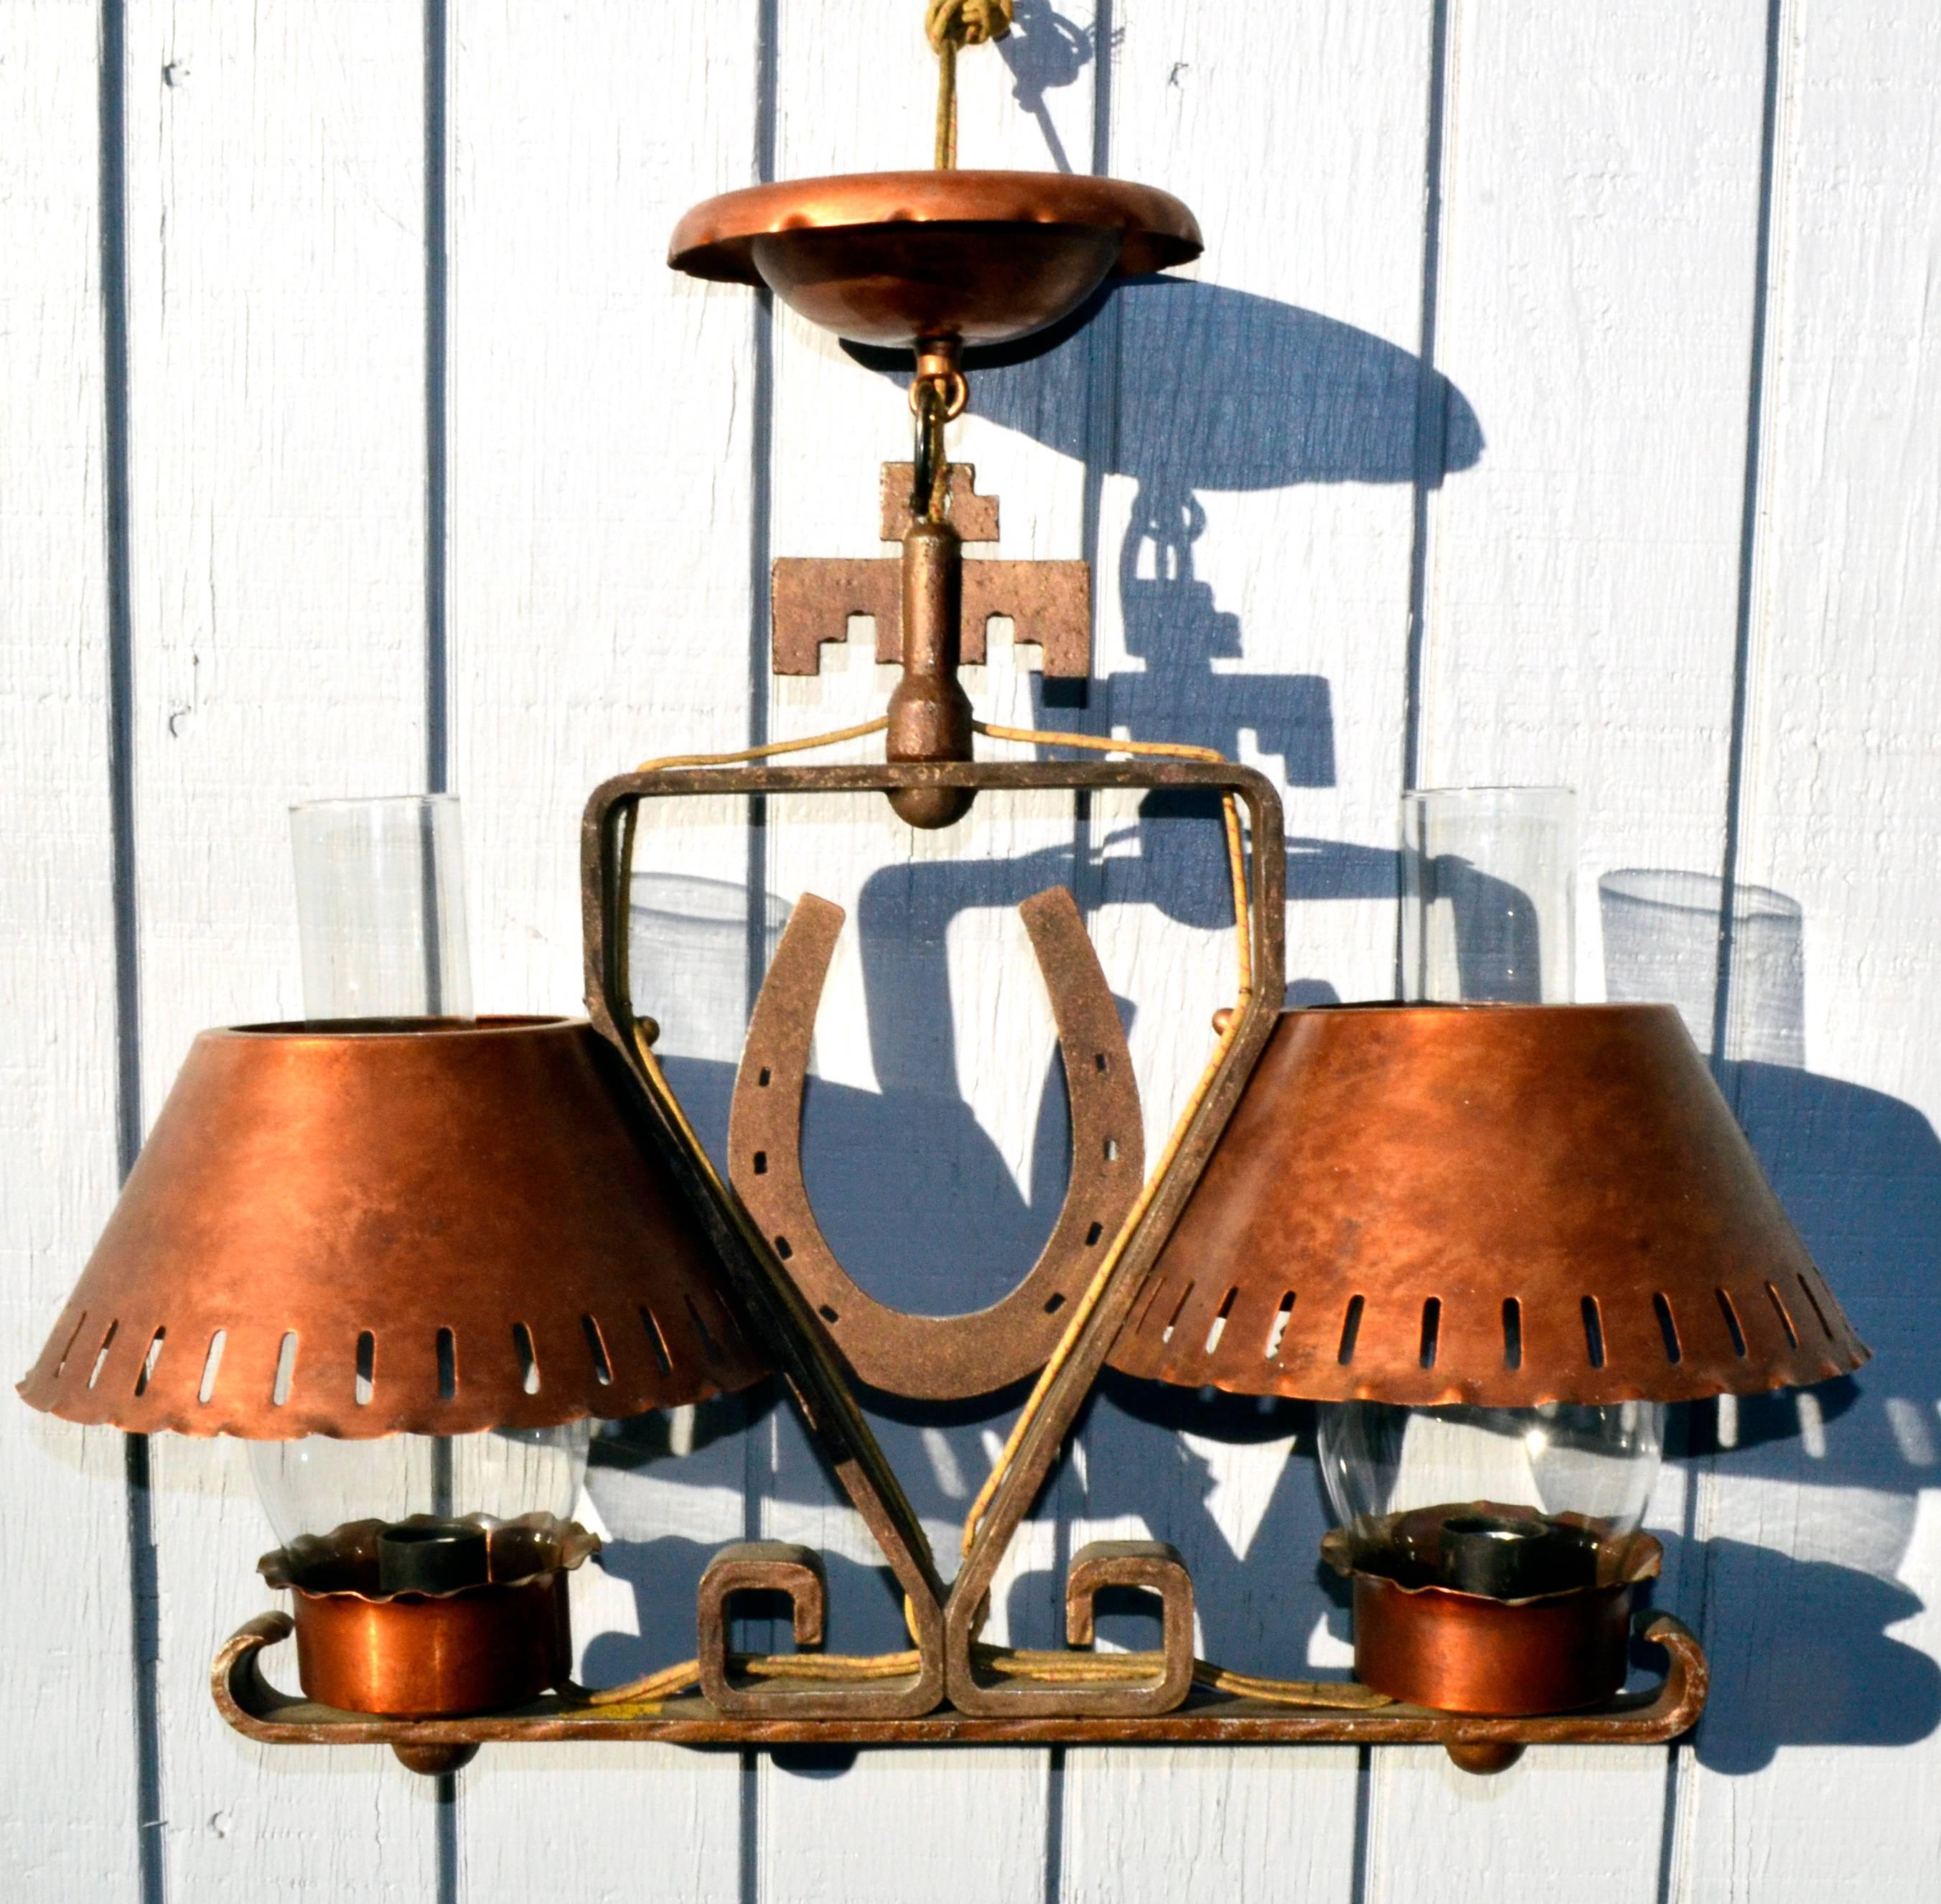 Wonderful rustic Horseshoe Ranch lamps made of copper shades and iron framework, circa 1940s. Size; 17